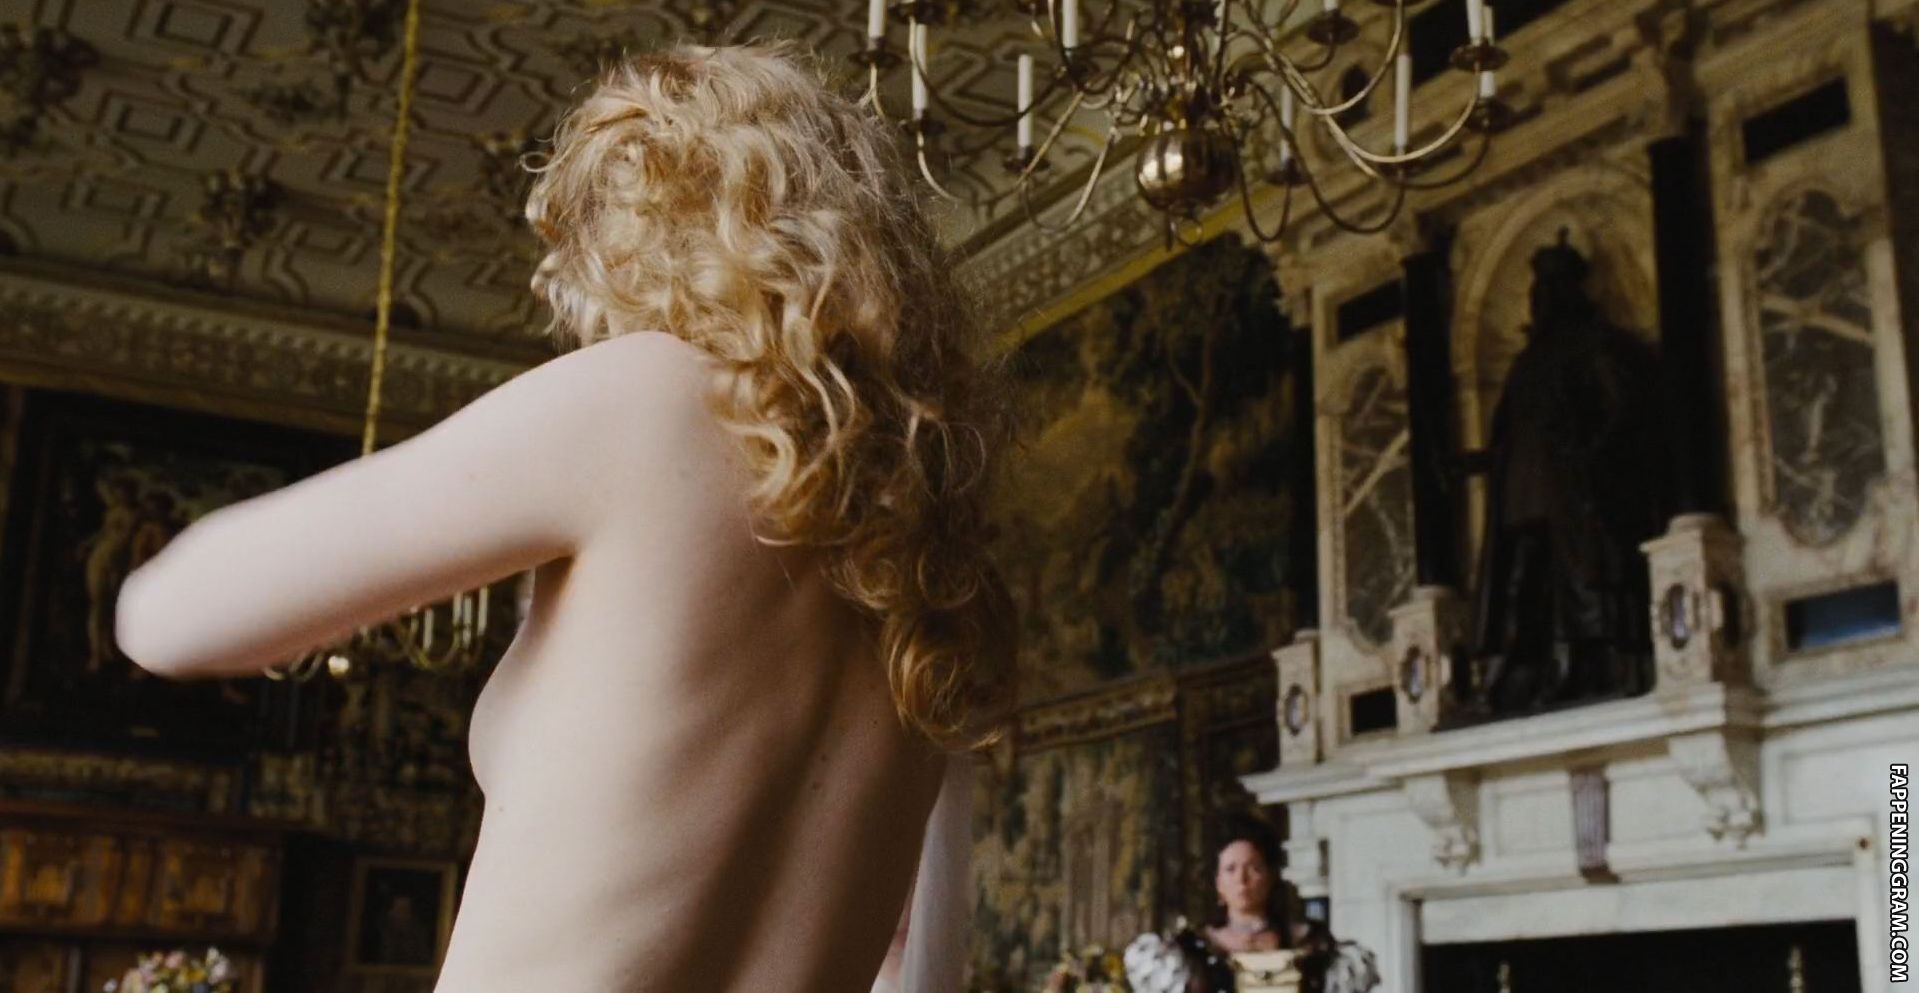 Emma Stone Nude The Fappening - Page 8 - FappeningGram